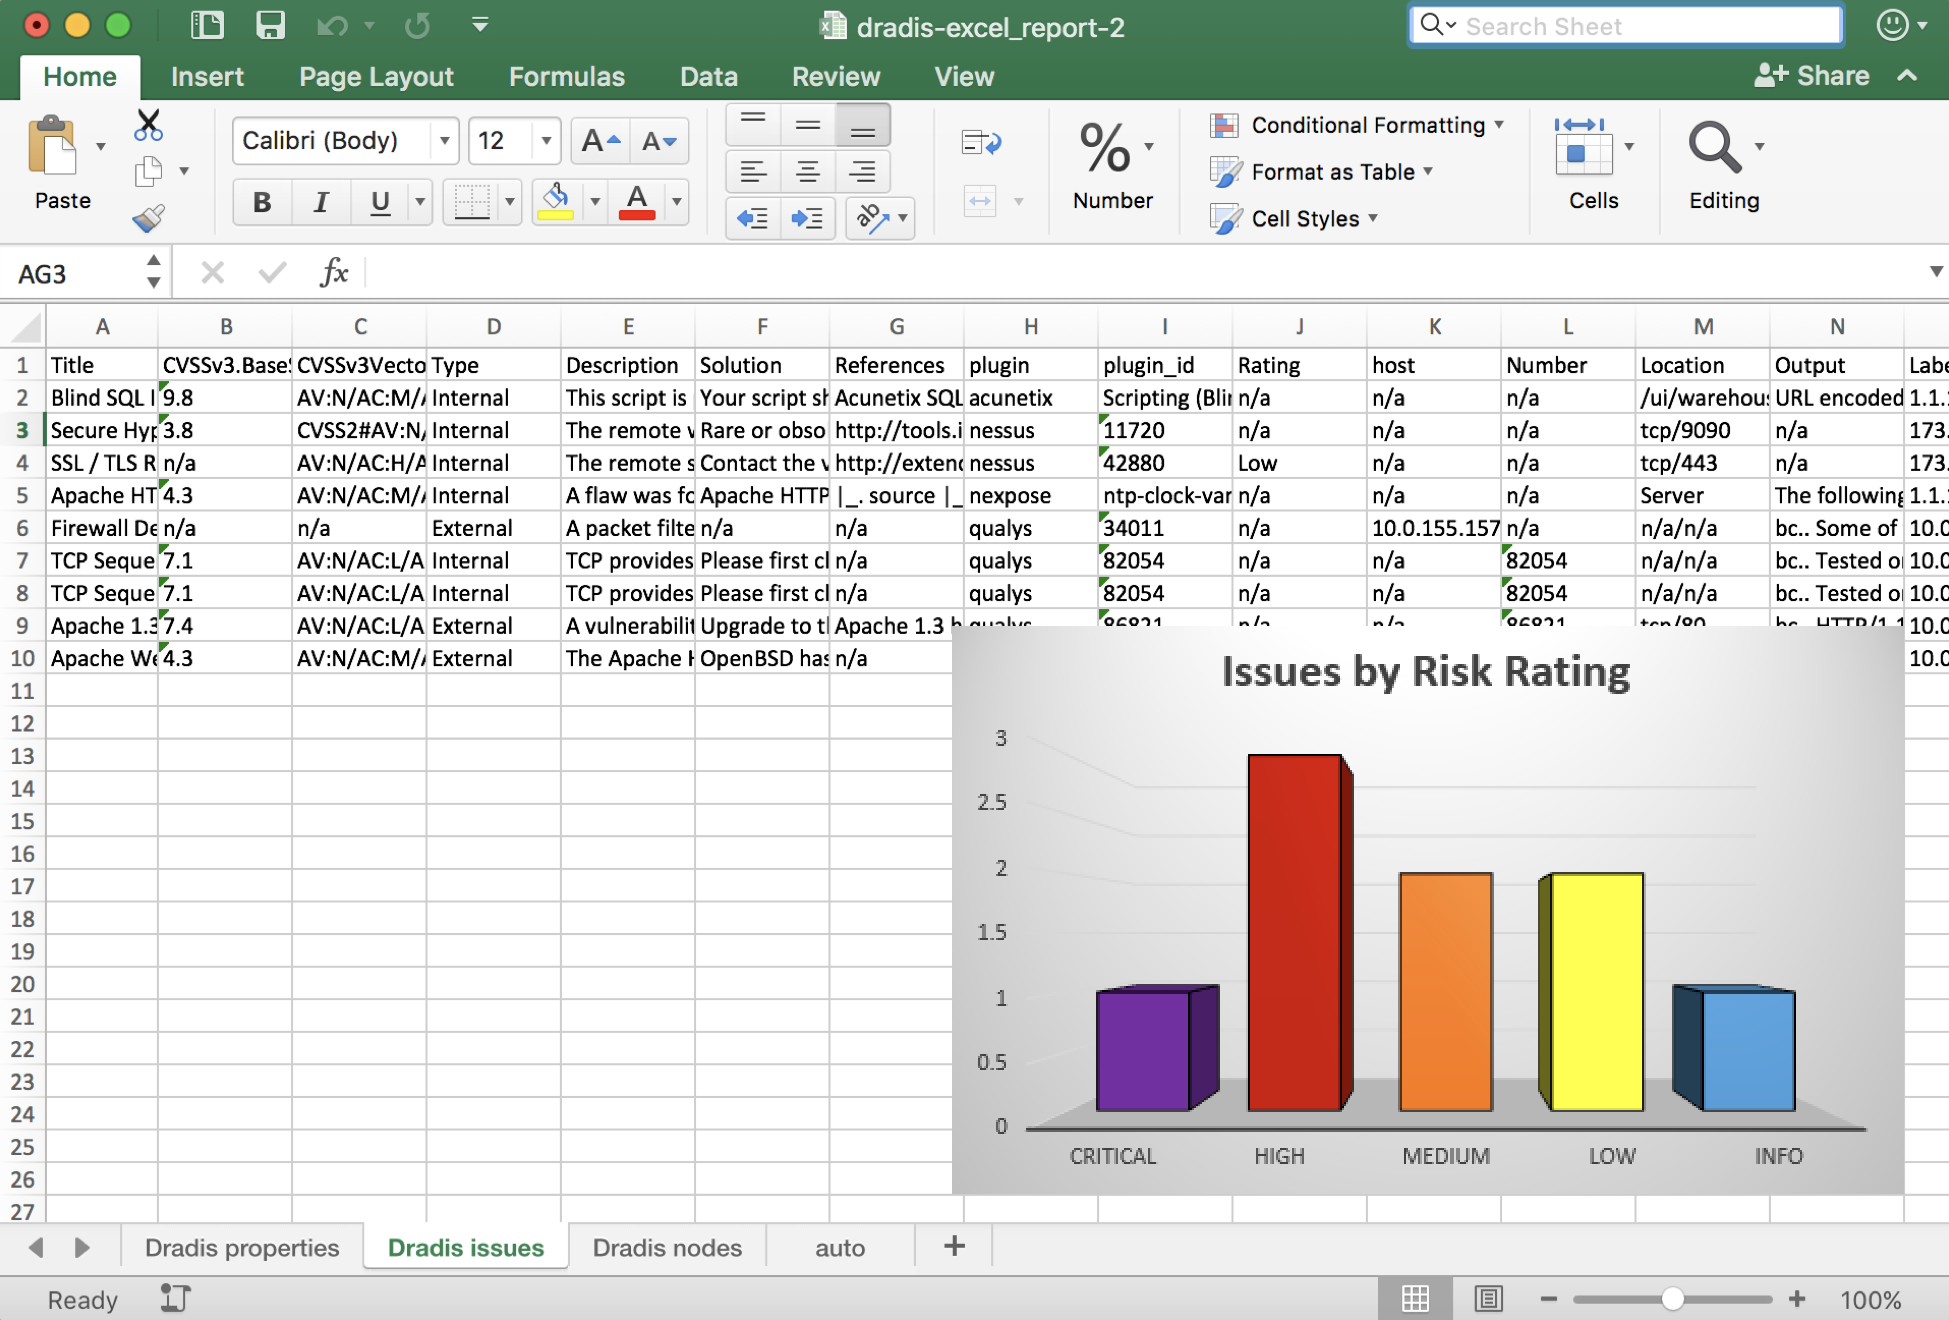 An advanced Excel report generated using Dradis